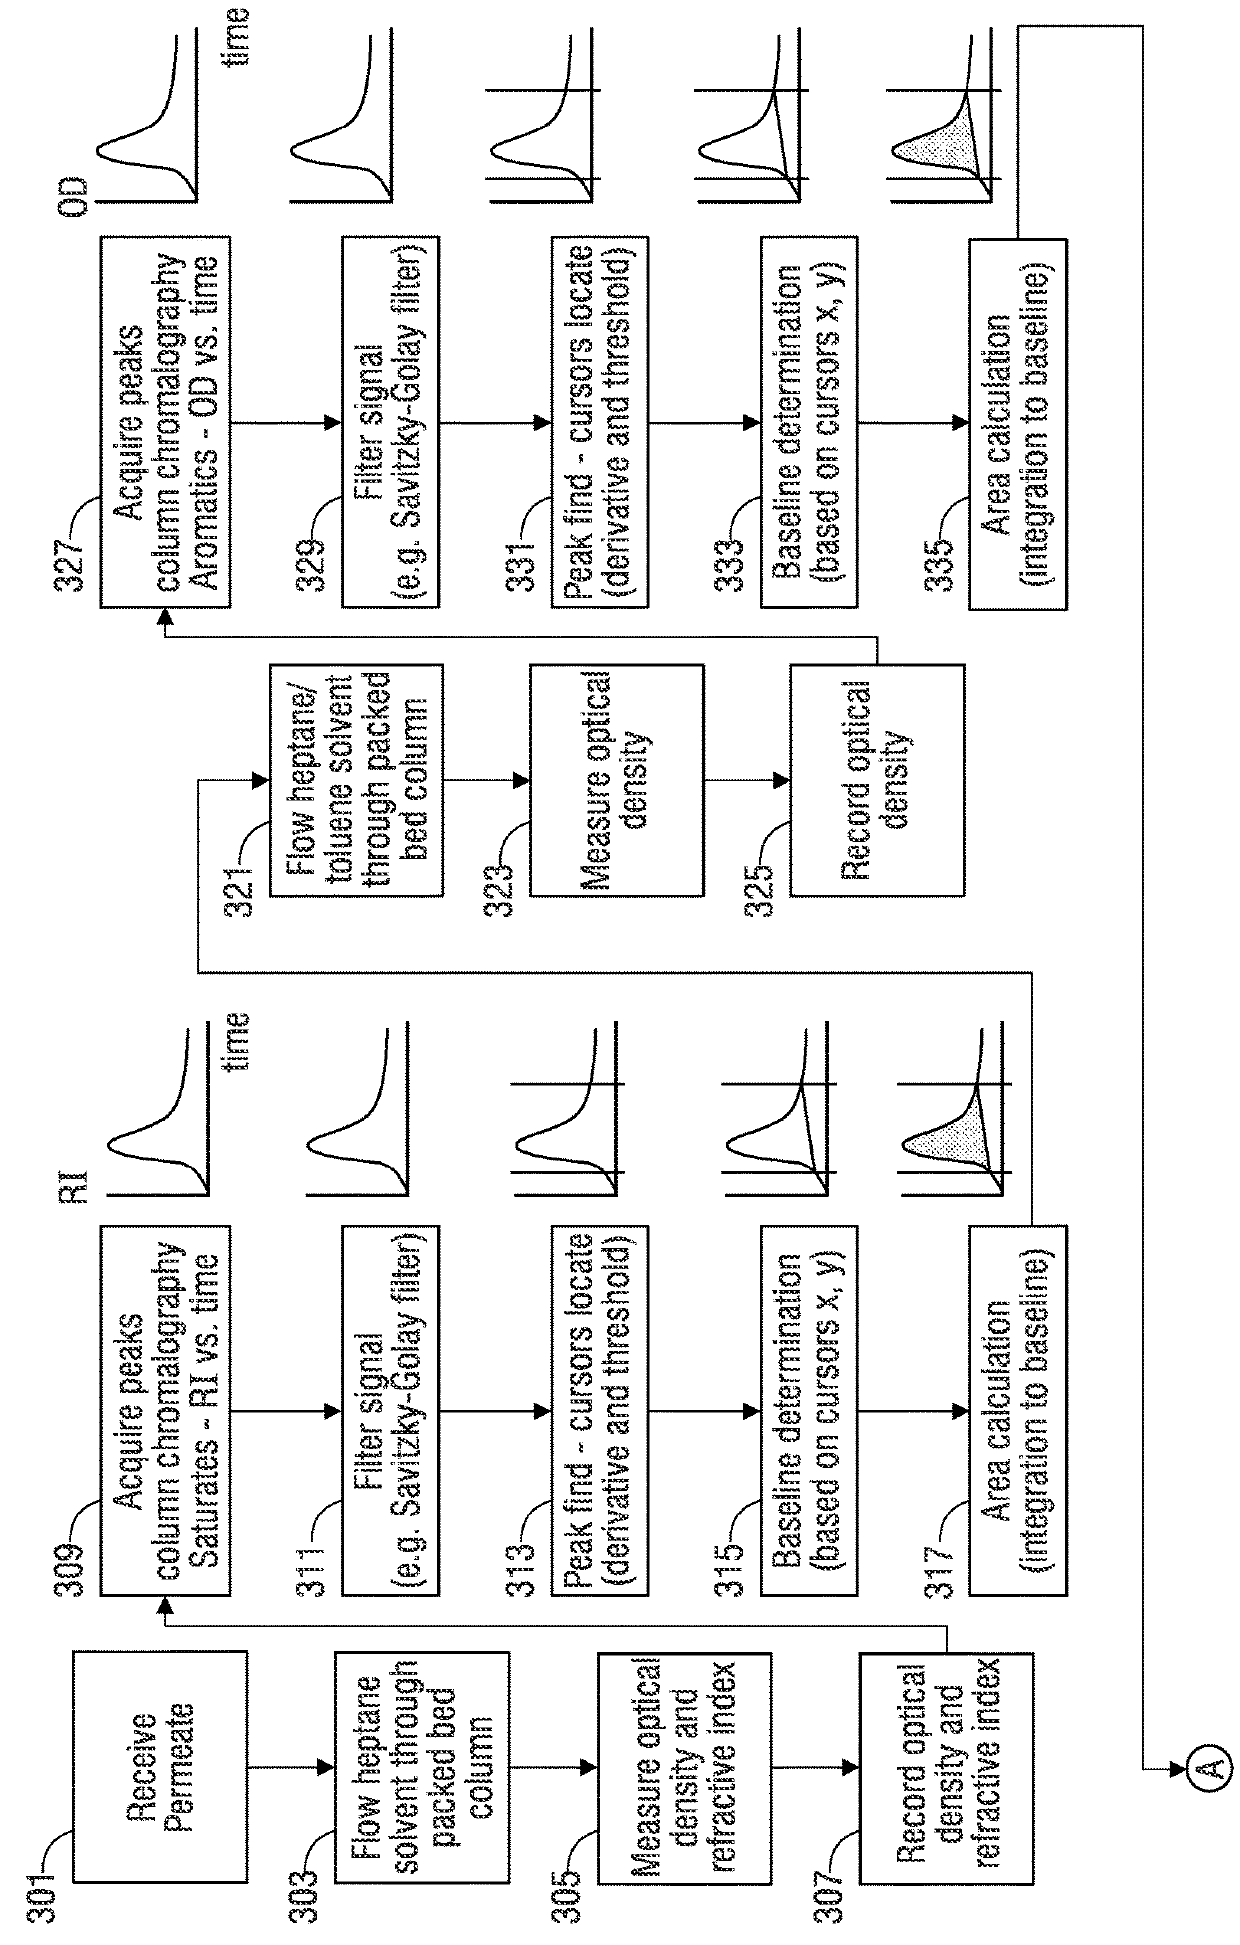 Automated method and apparatus for measuring saturate, aromatic, resin, and asphaltene fractions using microfluidics and spectroscopy